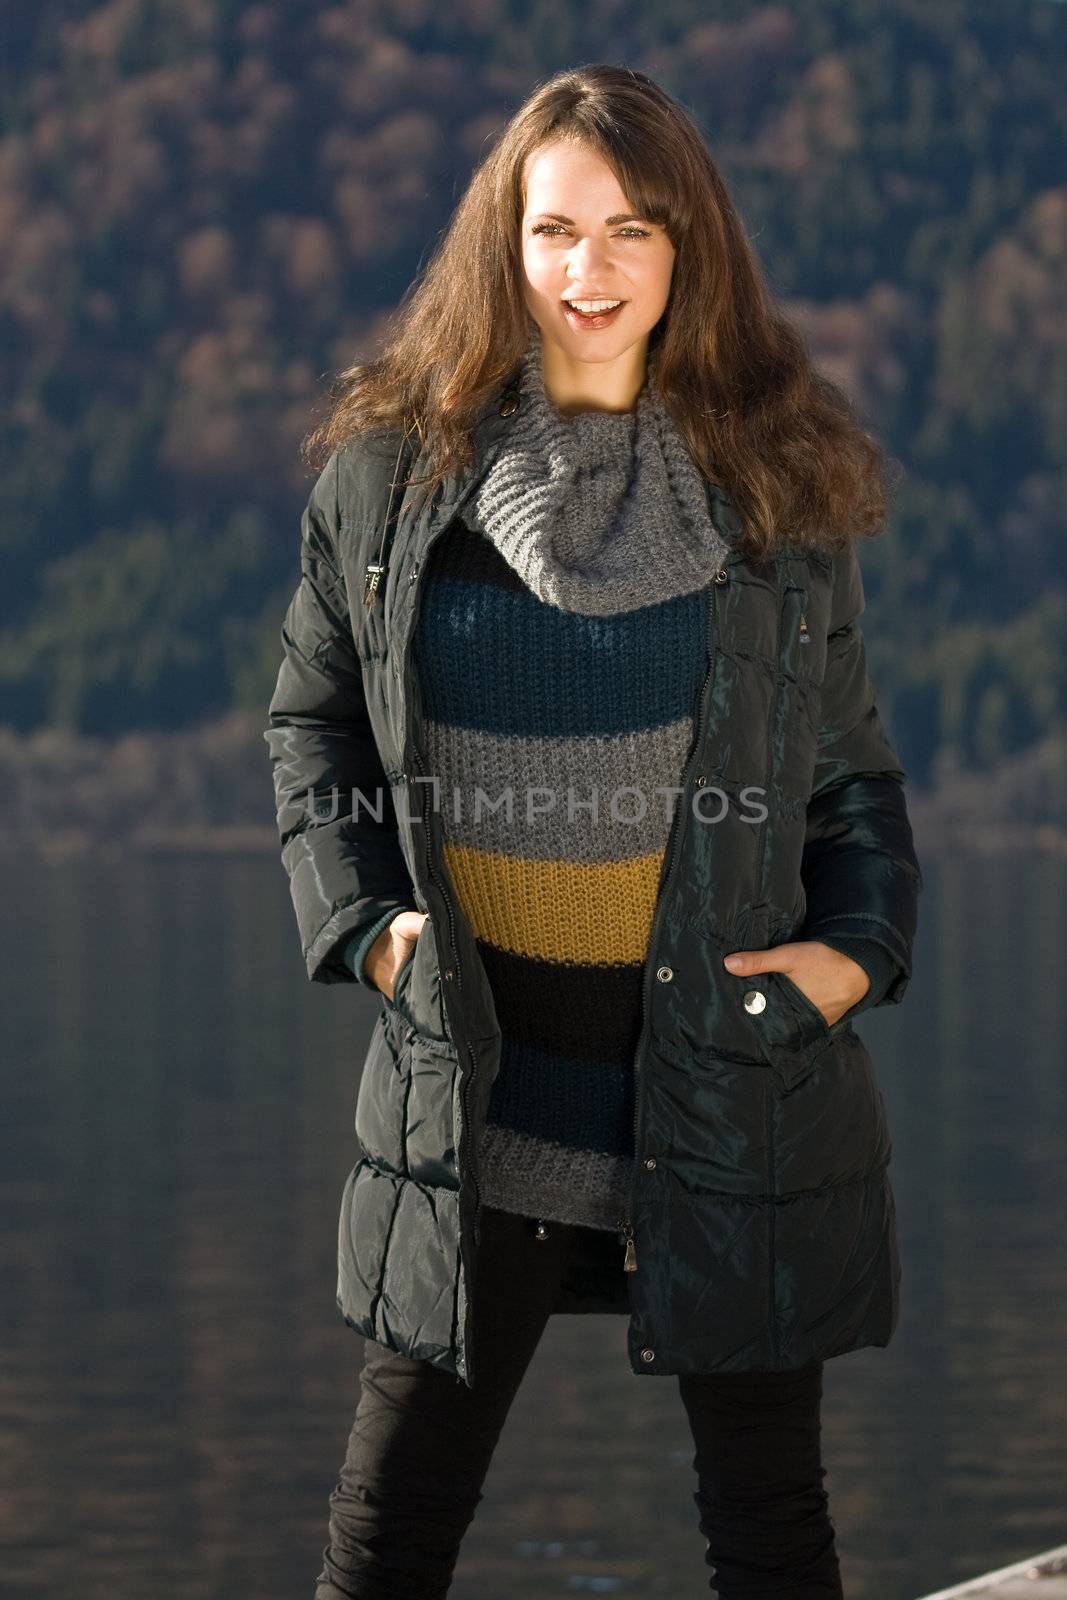 Model with the latest fashion this fall with lake in background